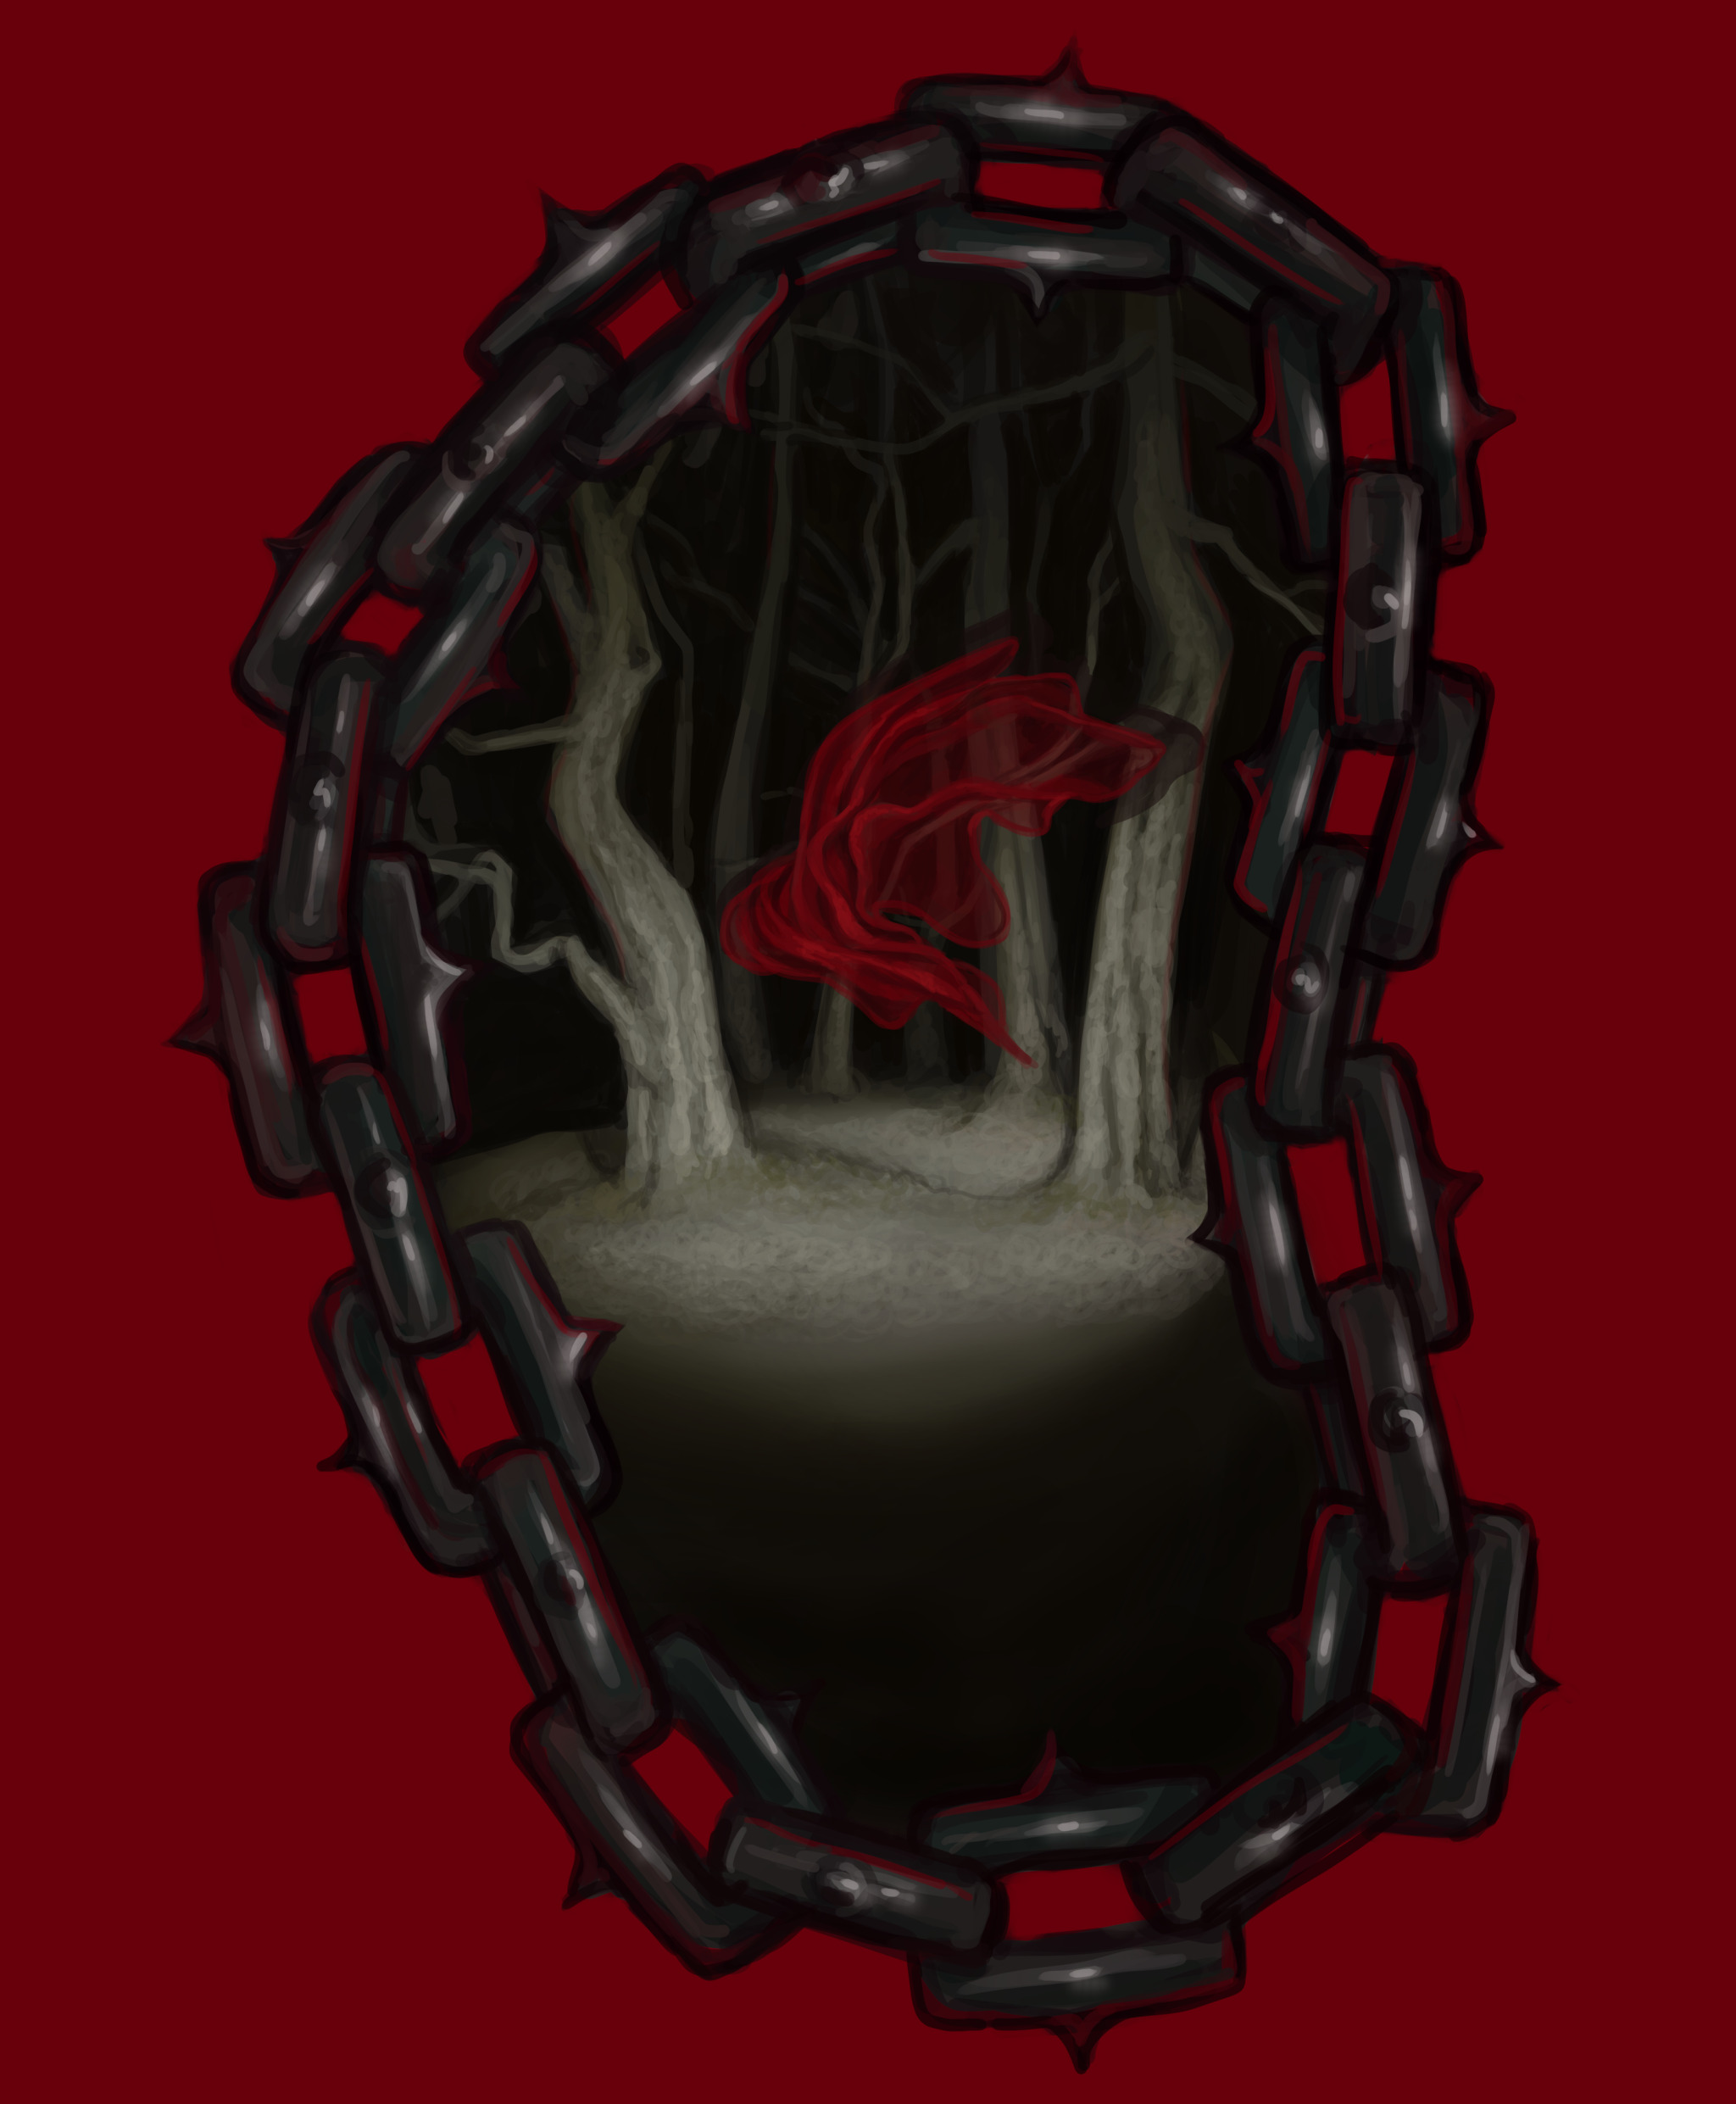 Digital painting of a red background with huge, thick spiked chains in a circle in the middle. Framed in the circle of chains is a scene showing the woods at night, and a red see-through bit of fabric floating in the air in the middle of it